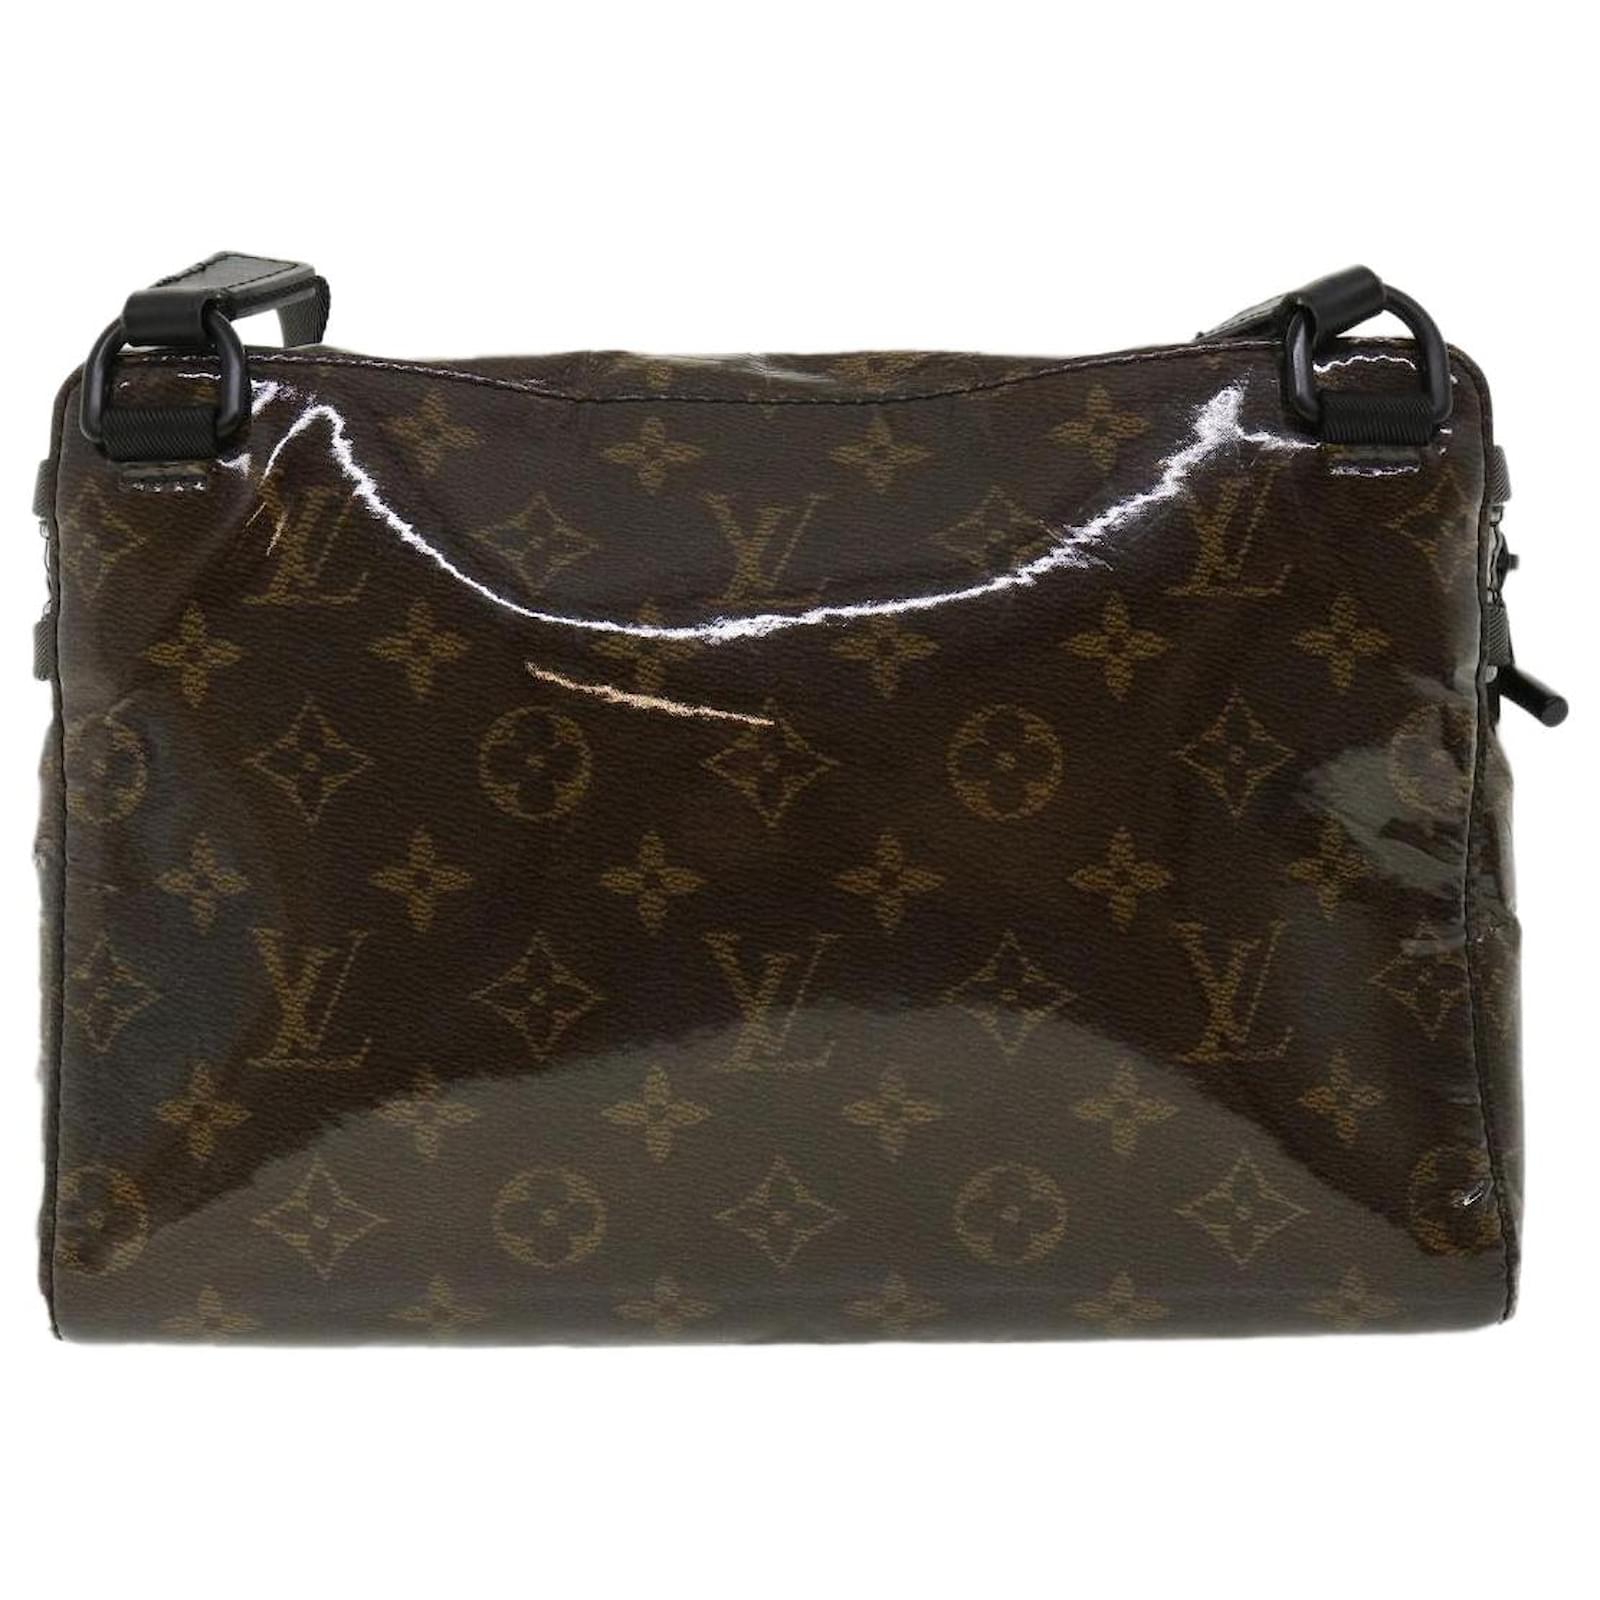 Pre-owned Louis Vuitton Keepall Bandouliere Monogram Glaze 50 Brown